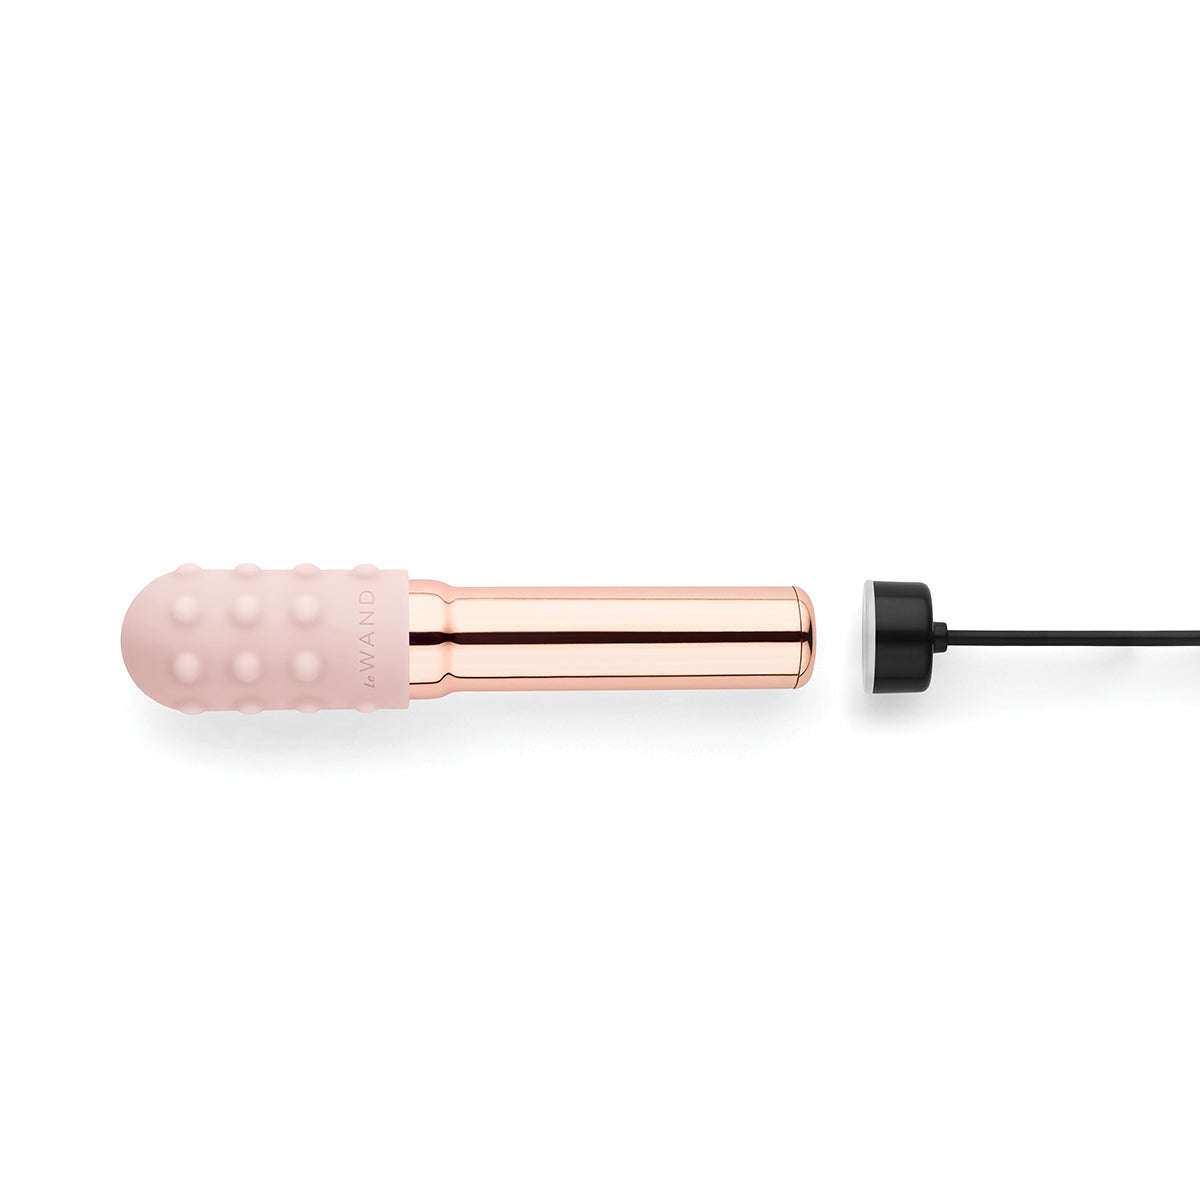 Le Wand Chrome Grand Bullet - Rose Gold [A01471]